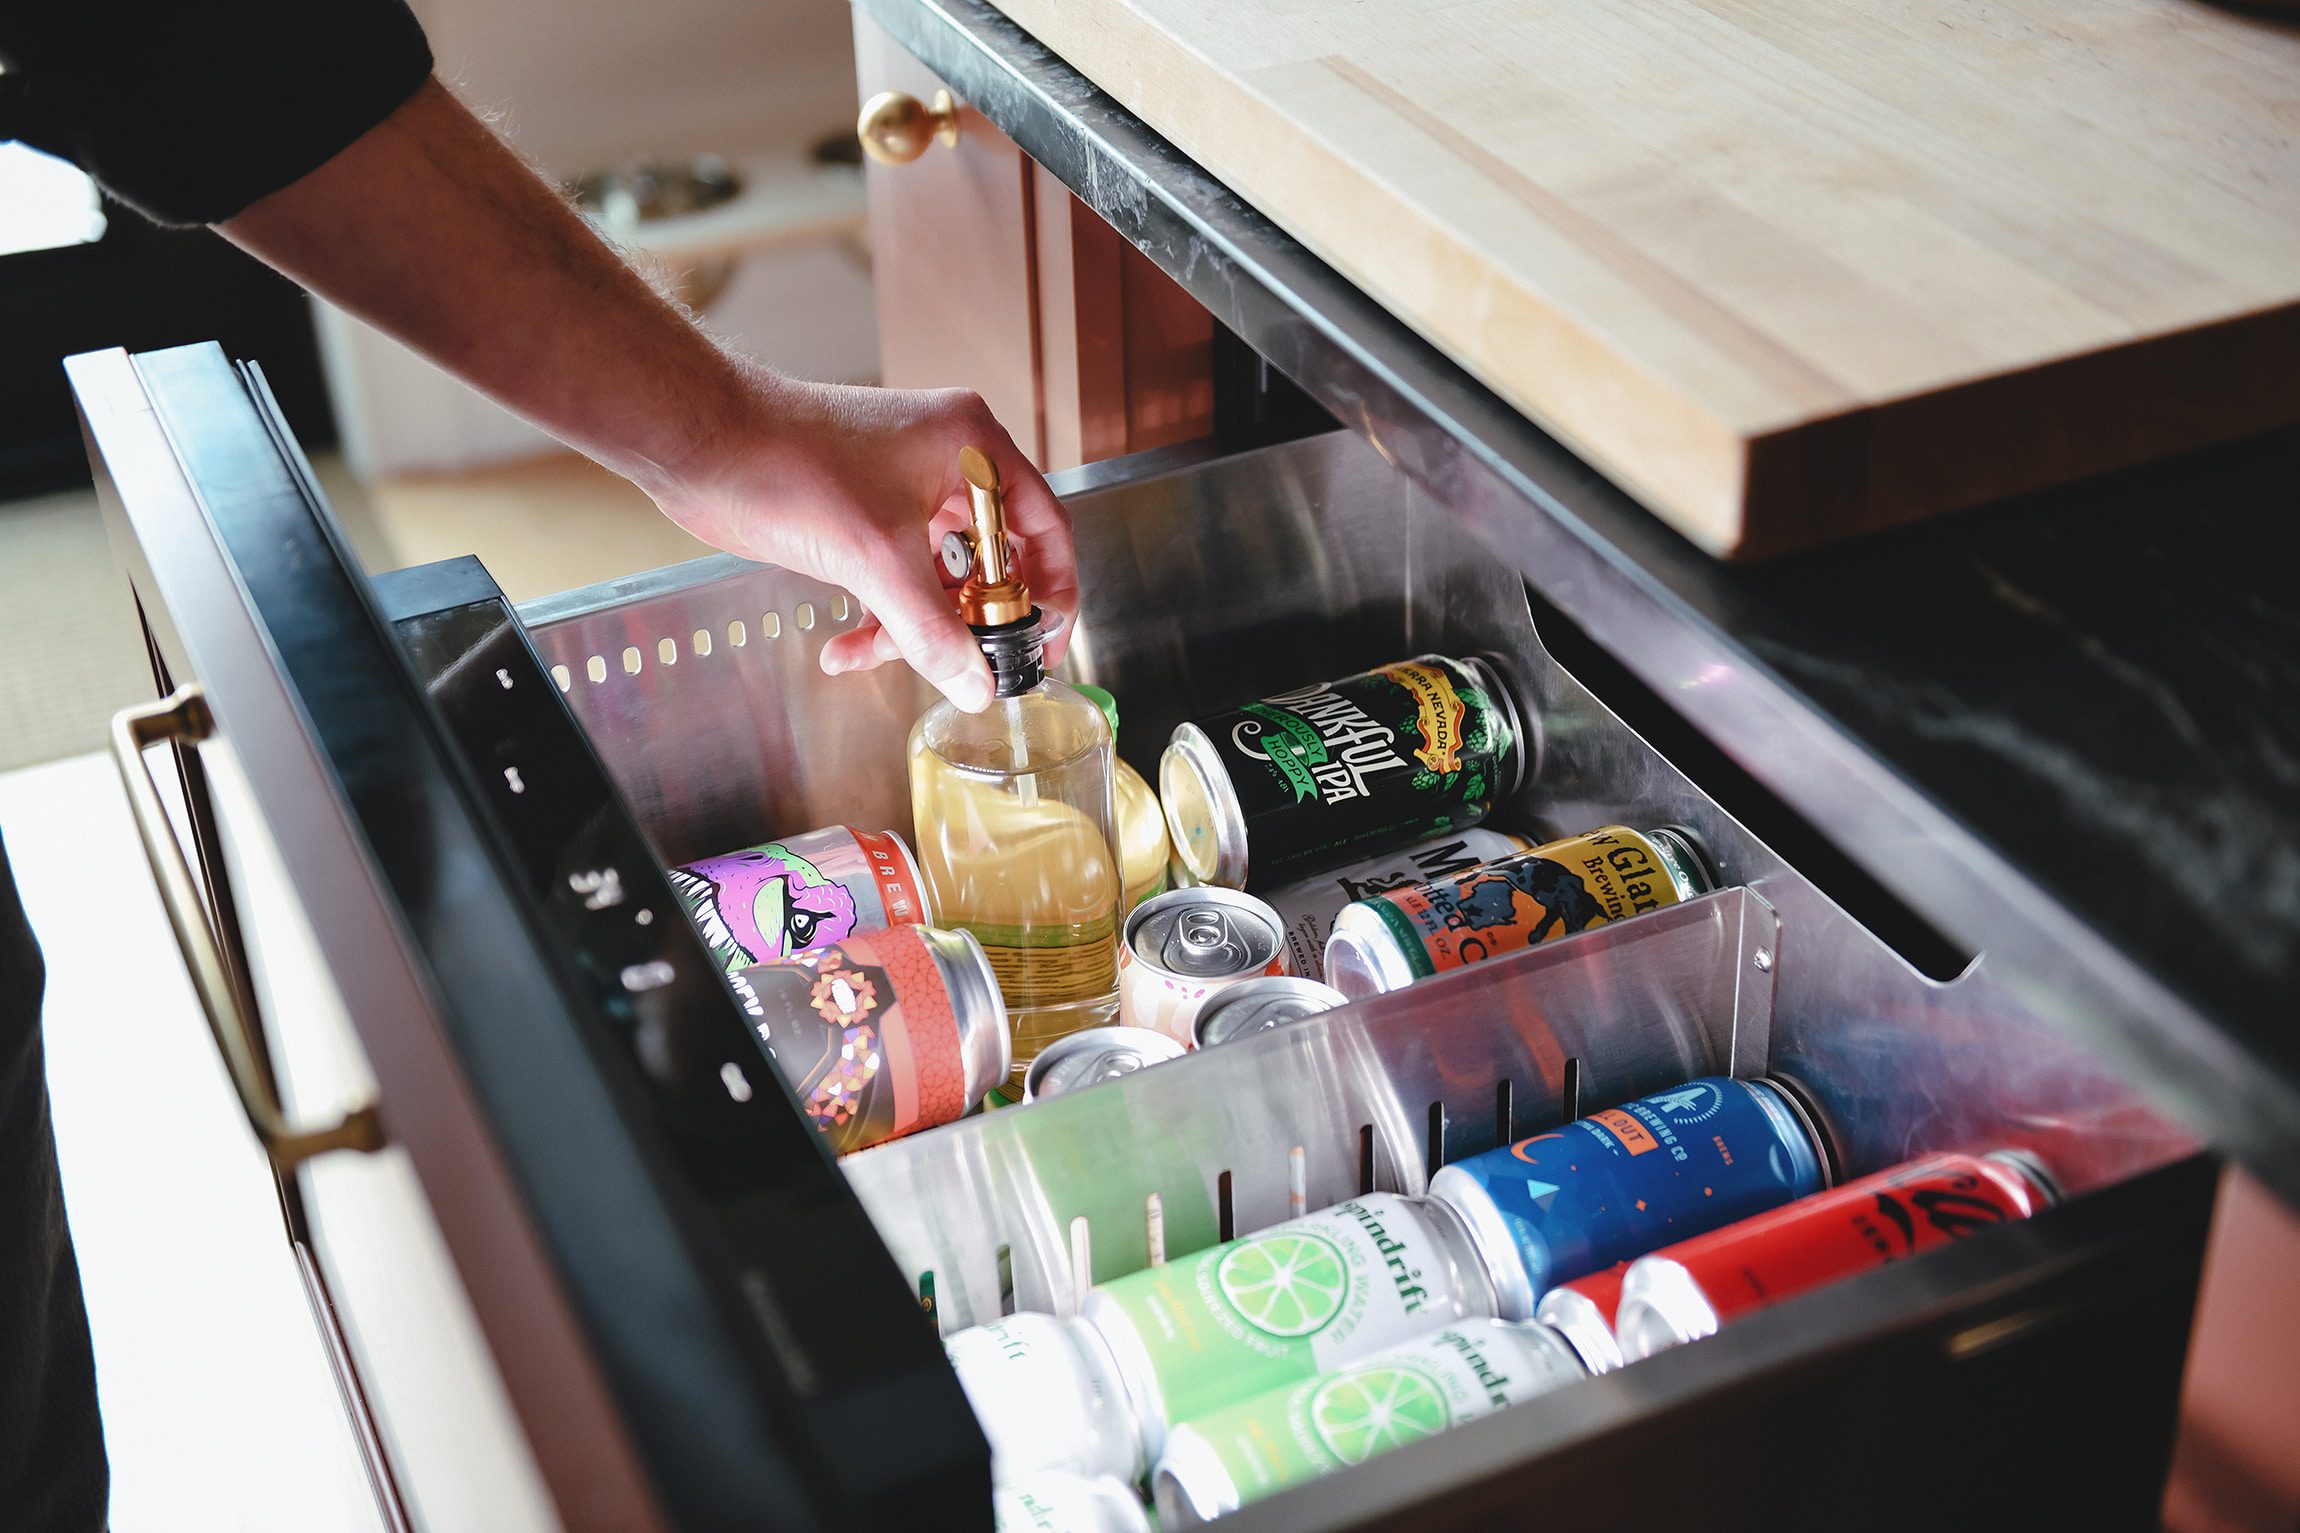 Scott grabs an item from the panel ready beverage fridge in our remodeled kitchen // via yellow brick home